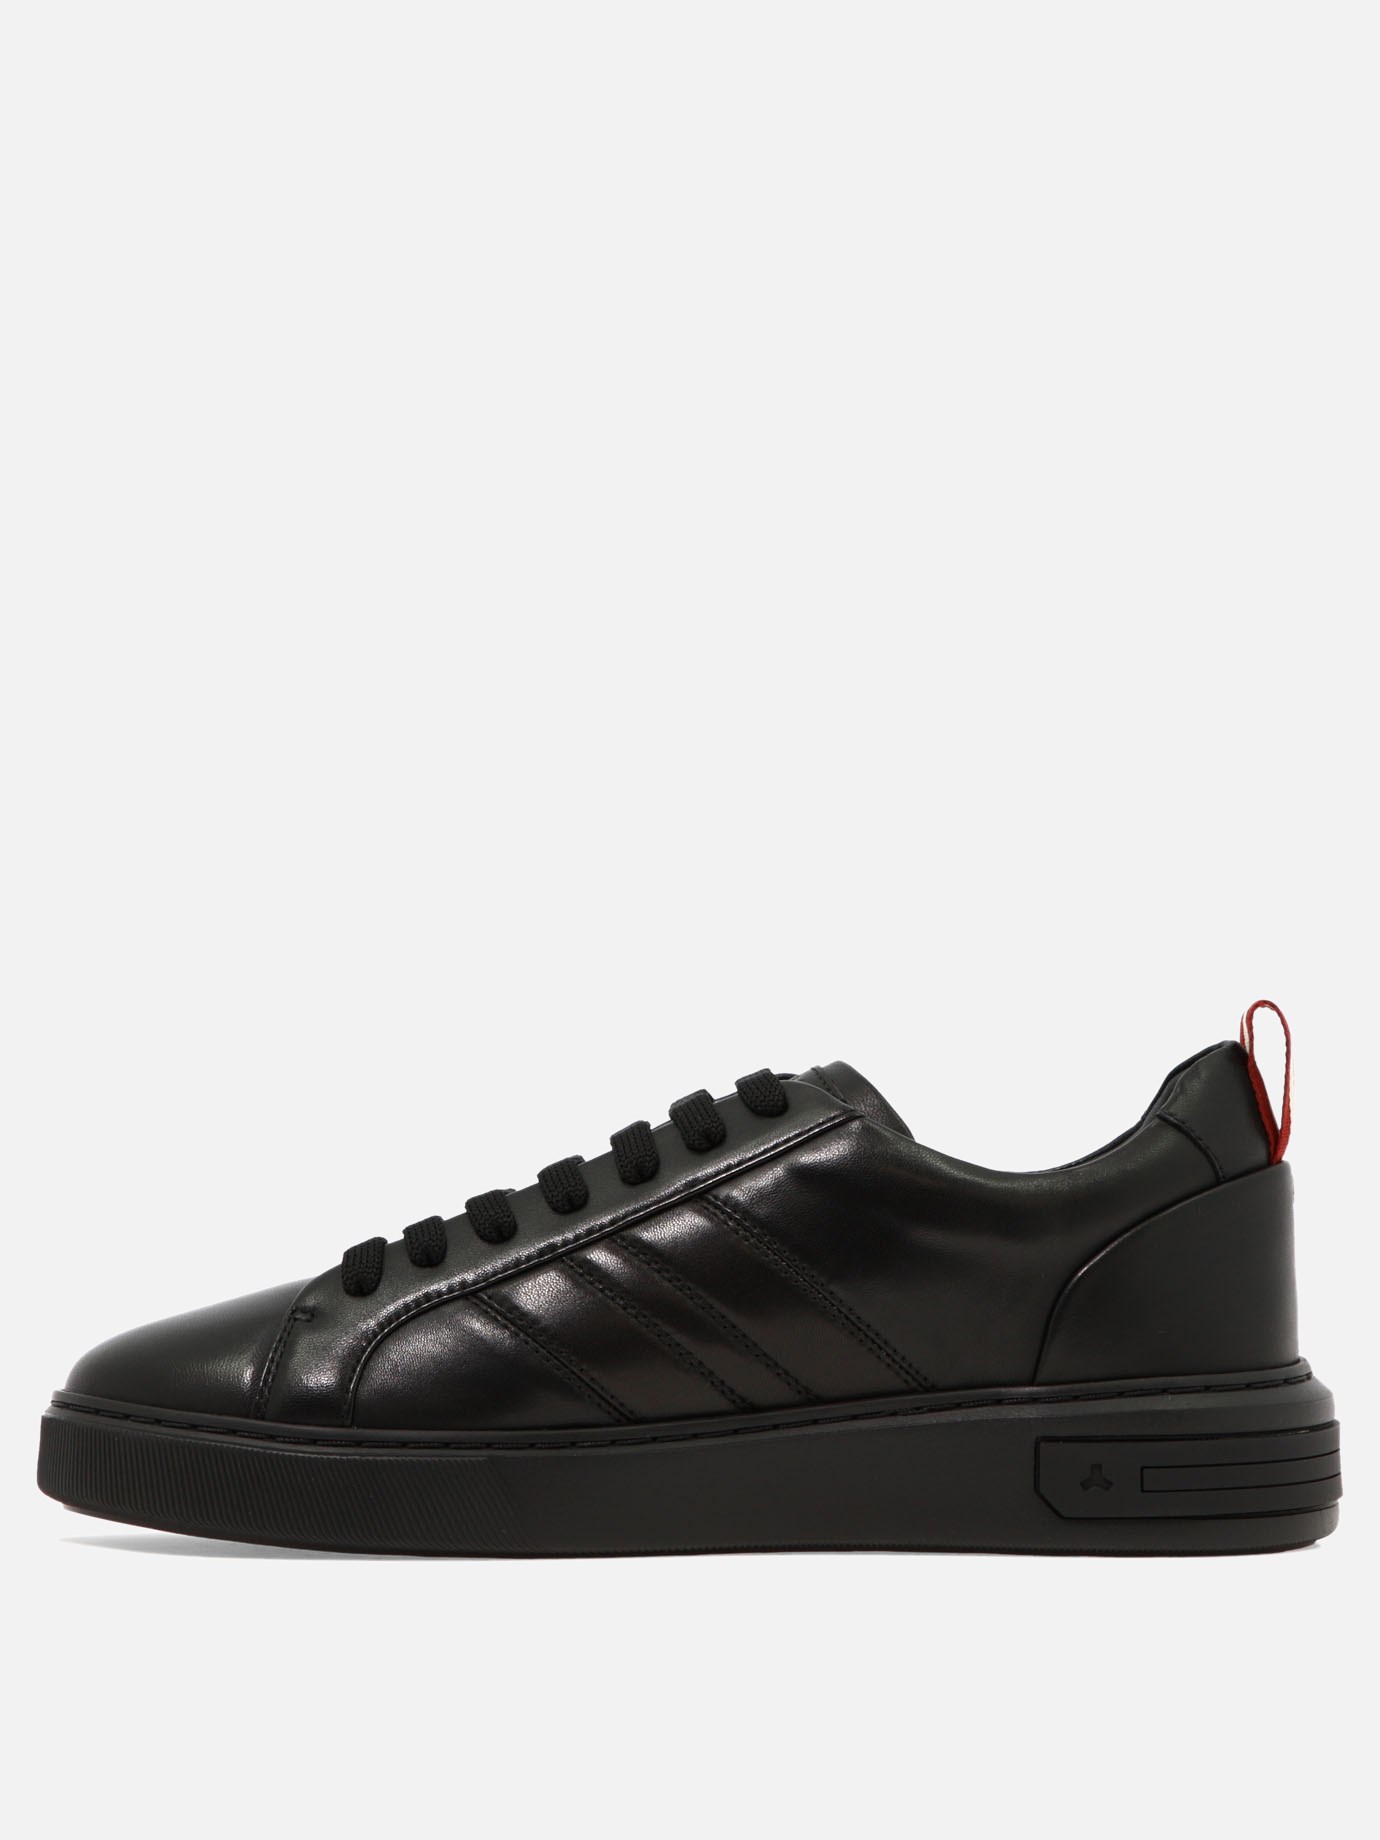  New Maxim  sneakers by Bally